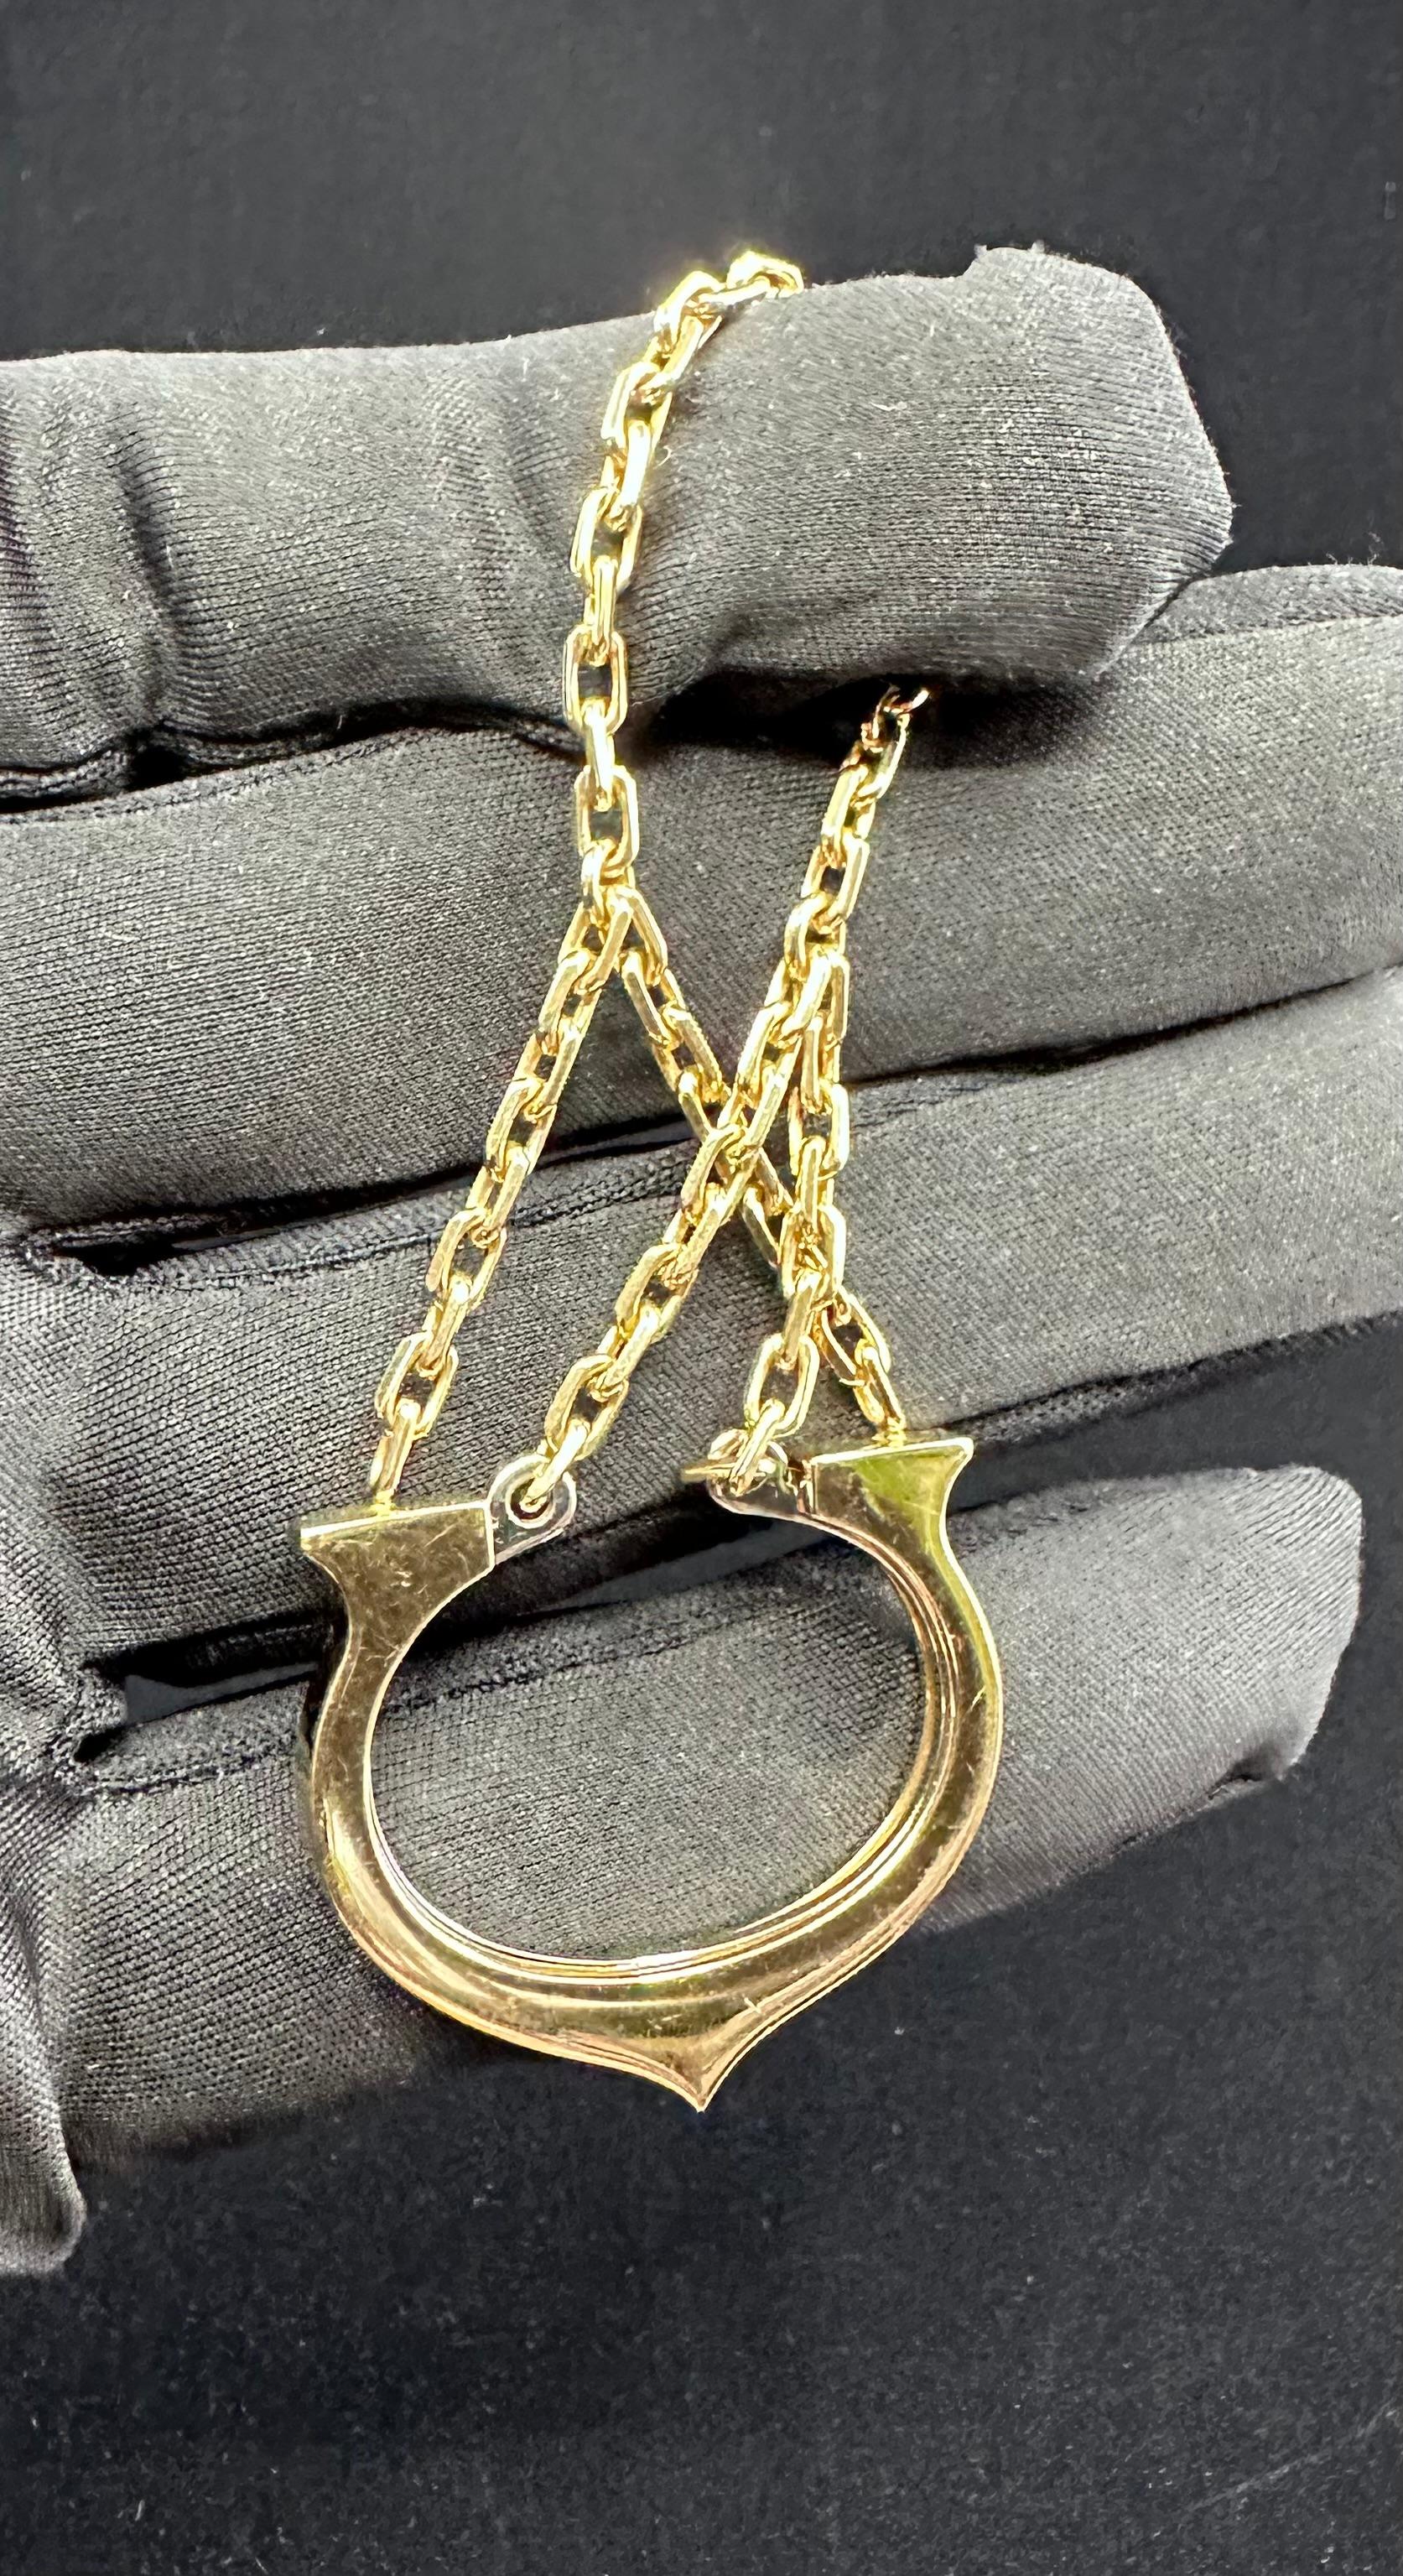 An awesome vintage Cartier keyring dating from the 2004 in 18 karat Yellow gold a C motif and chain.
Cartier 18k Gold C de Cartier Collection keychain
3.5 Length 
C Motif dimensions: 1.25 inch by 1.0 Inch
20 grams of 18k Gold 
Please see the video